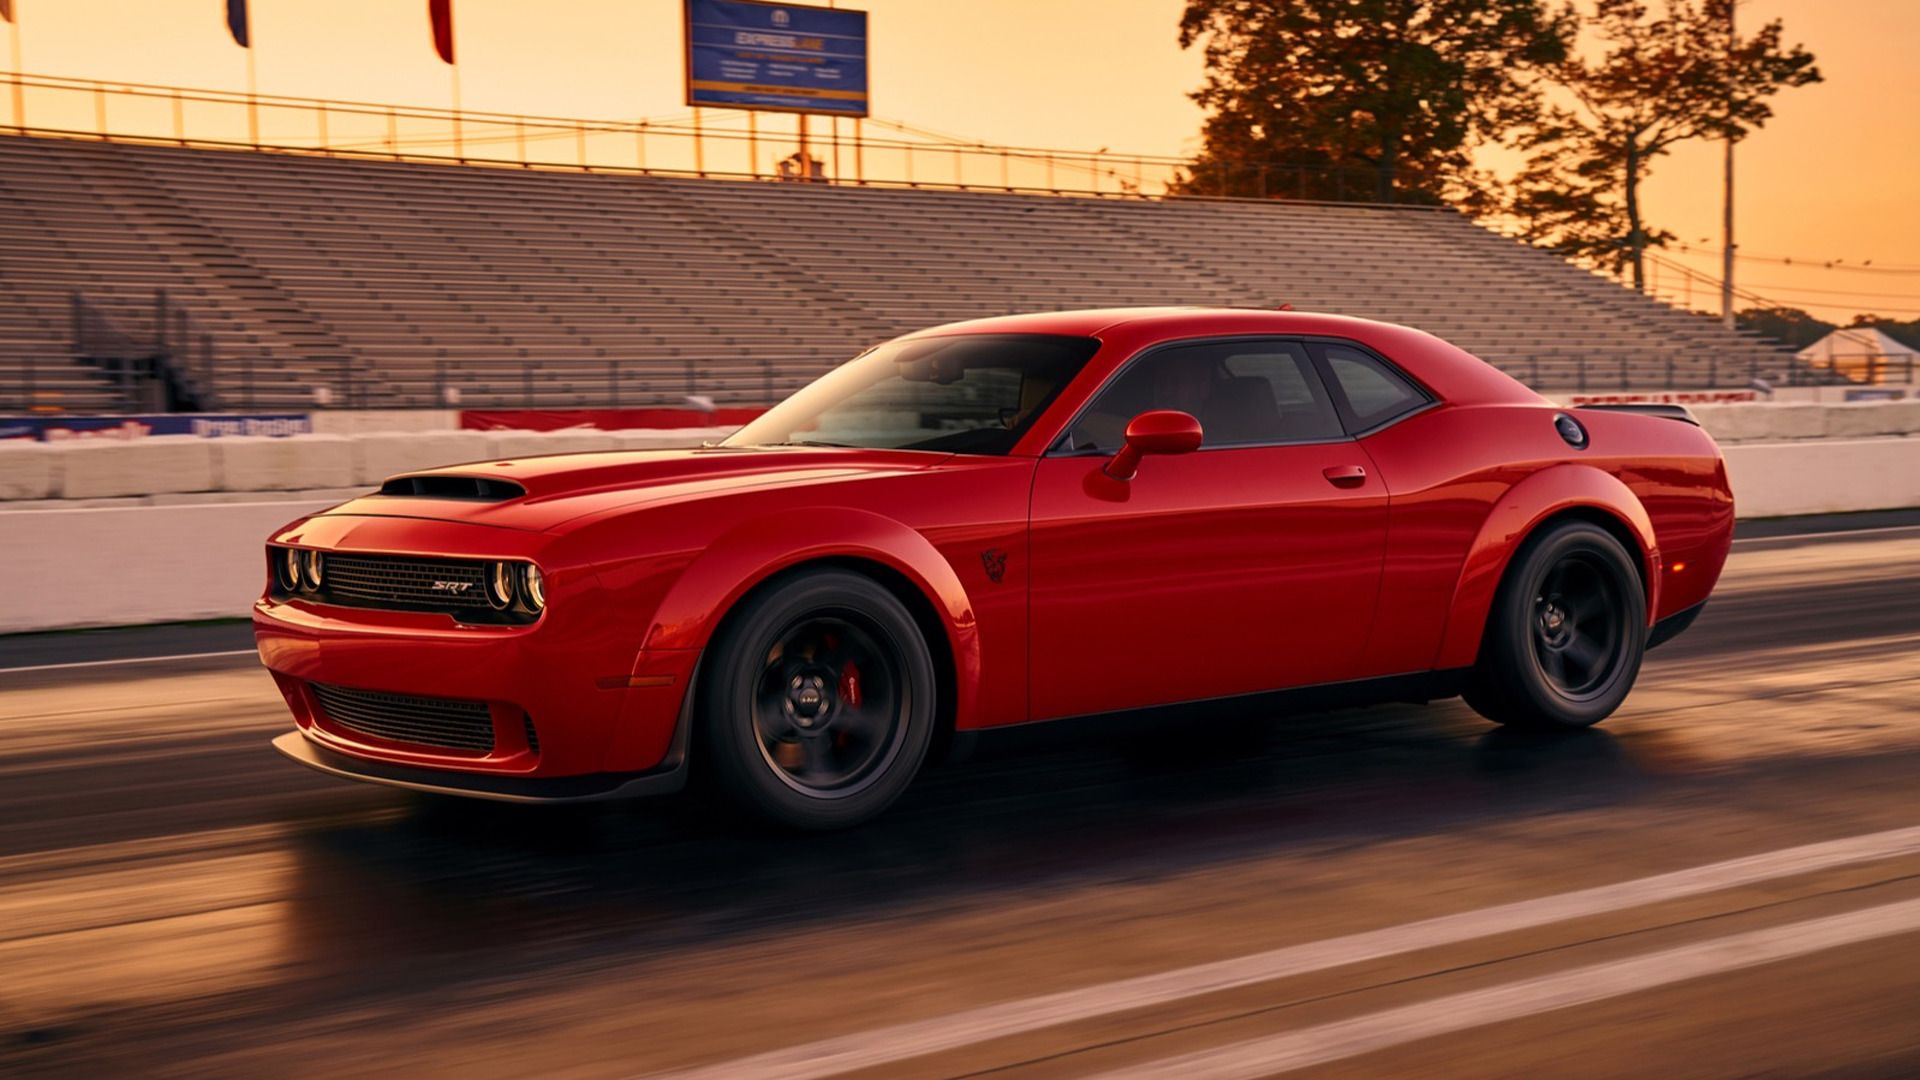 Dodge Demon Leaked Image: Will It Have Over 000 HP? Debut